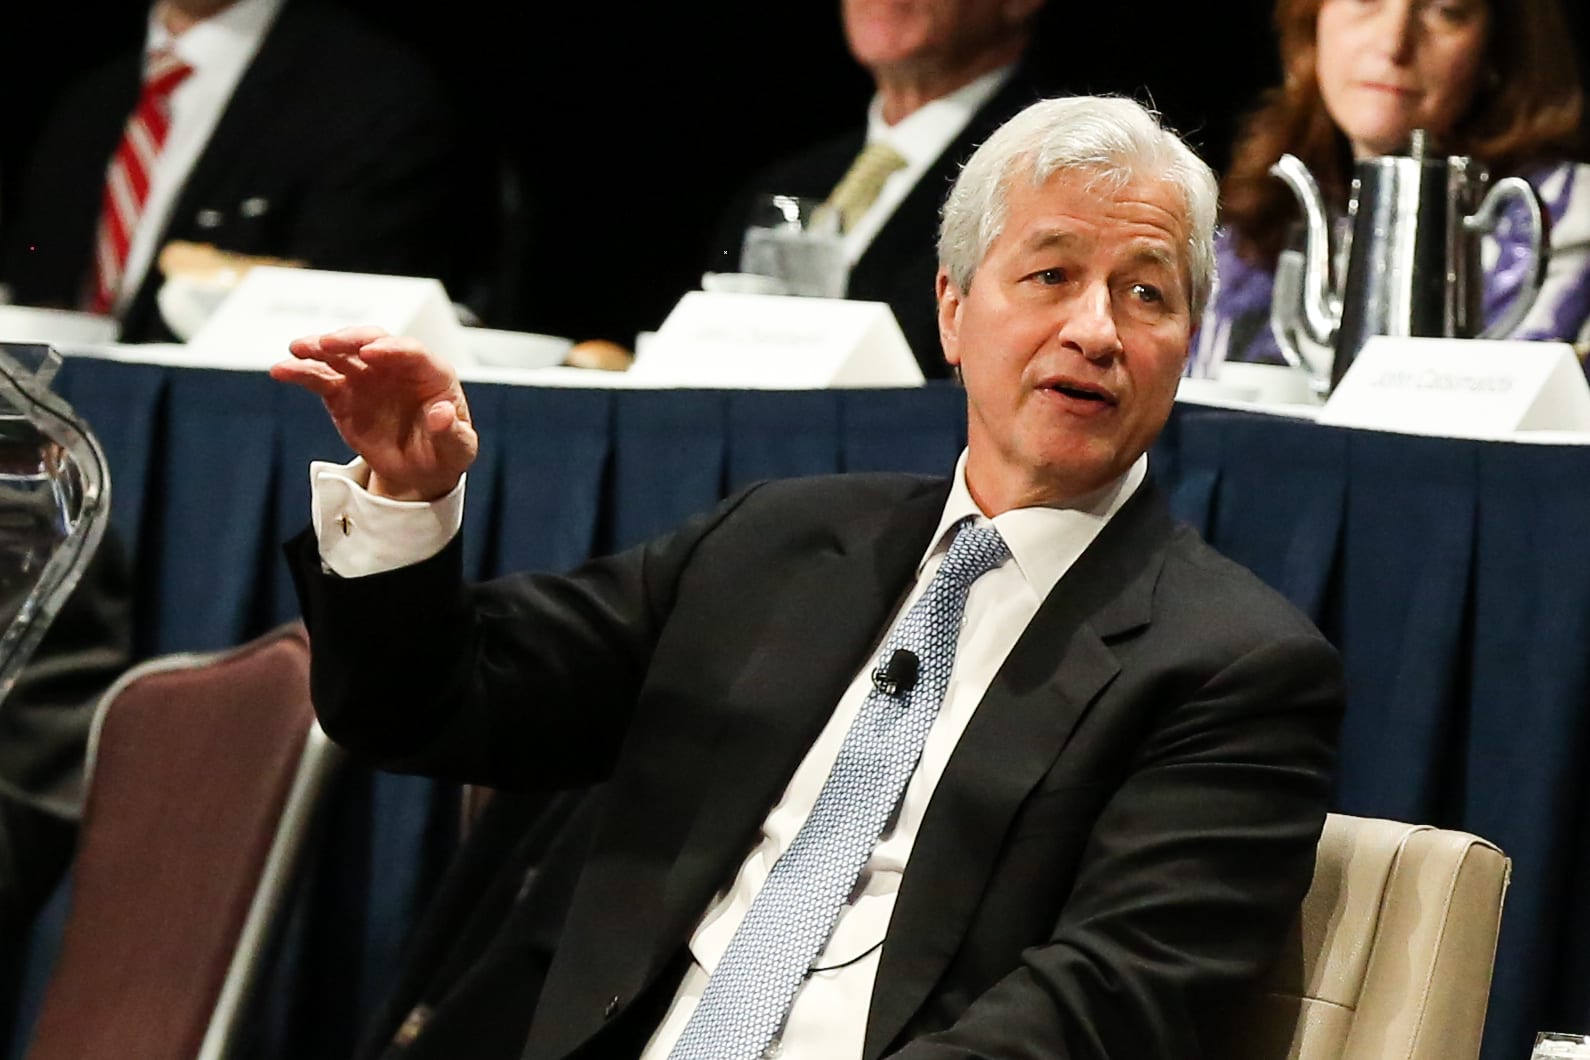 Jamie Dimon says his gut tells him a recession is 'not imminent'